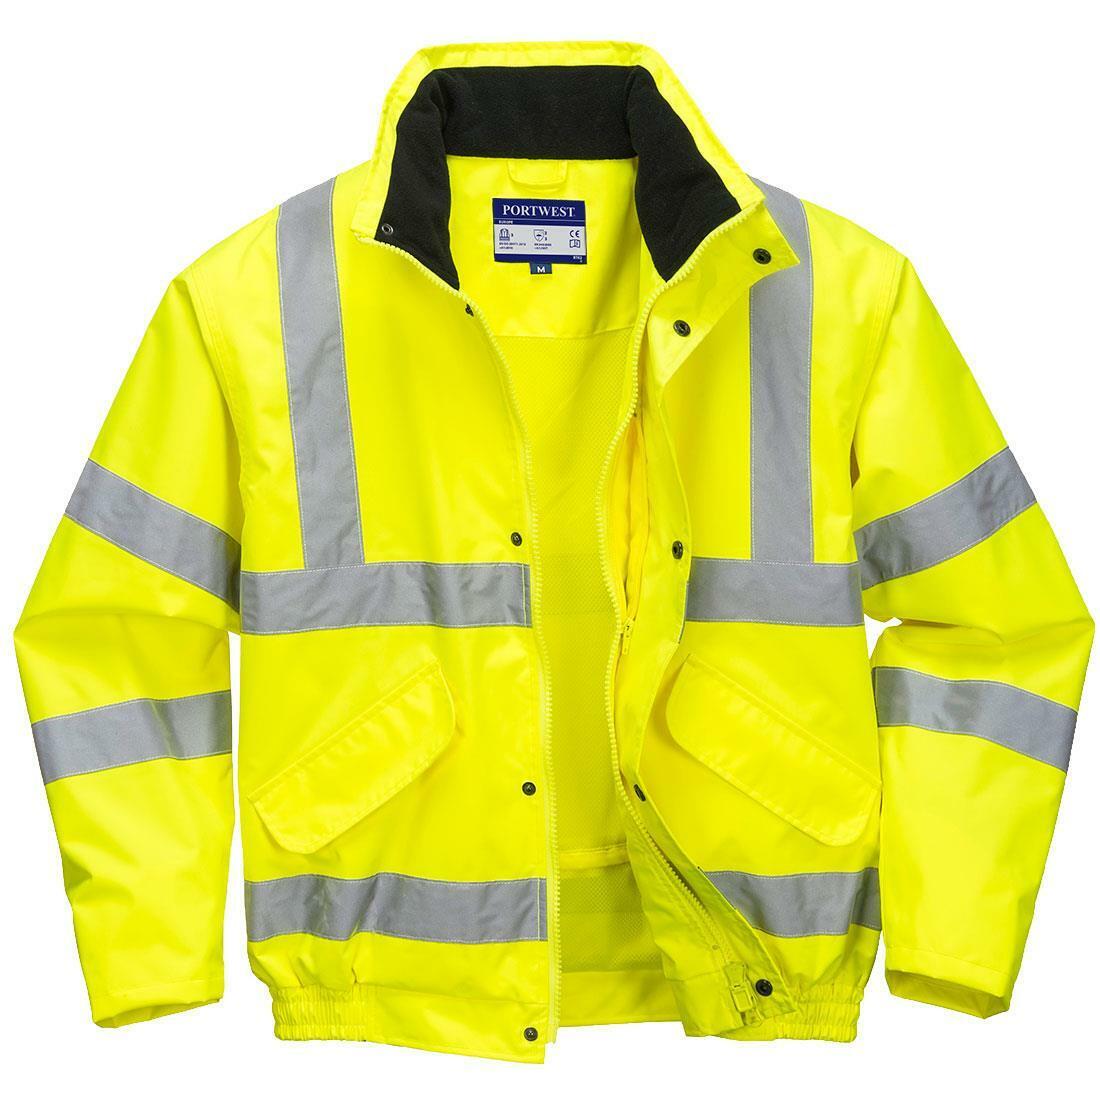 Portwest high-visibility yellow waterproof breathable bomber jacket #RT62